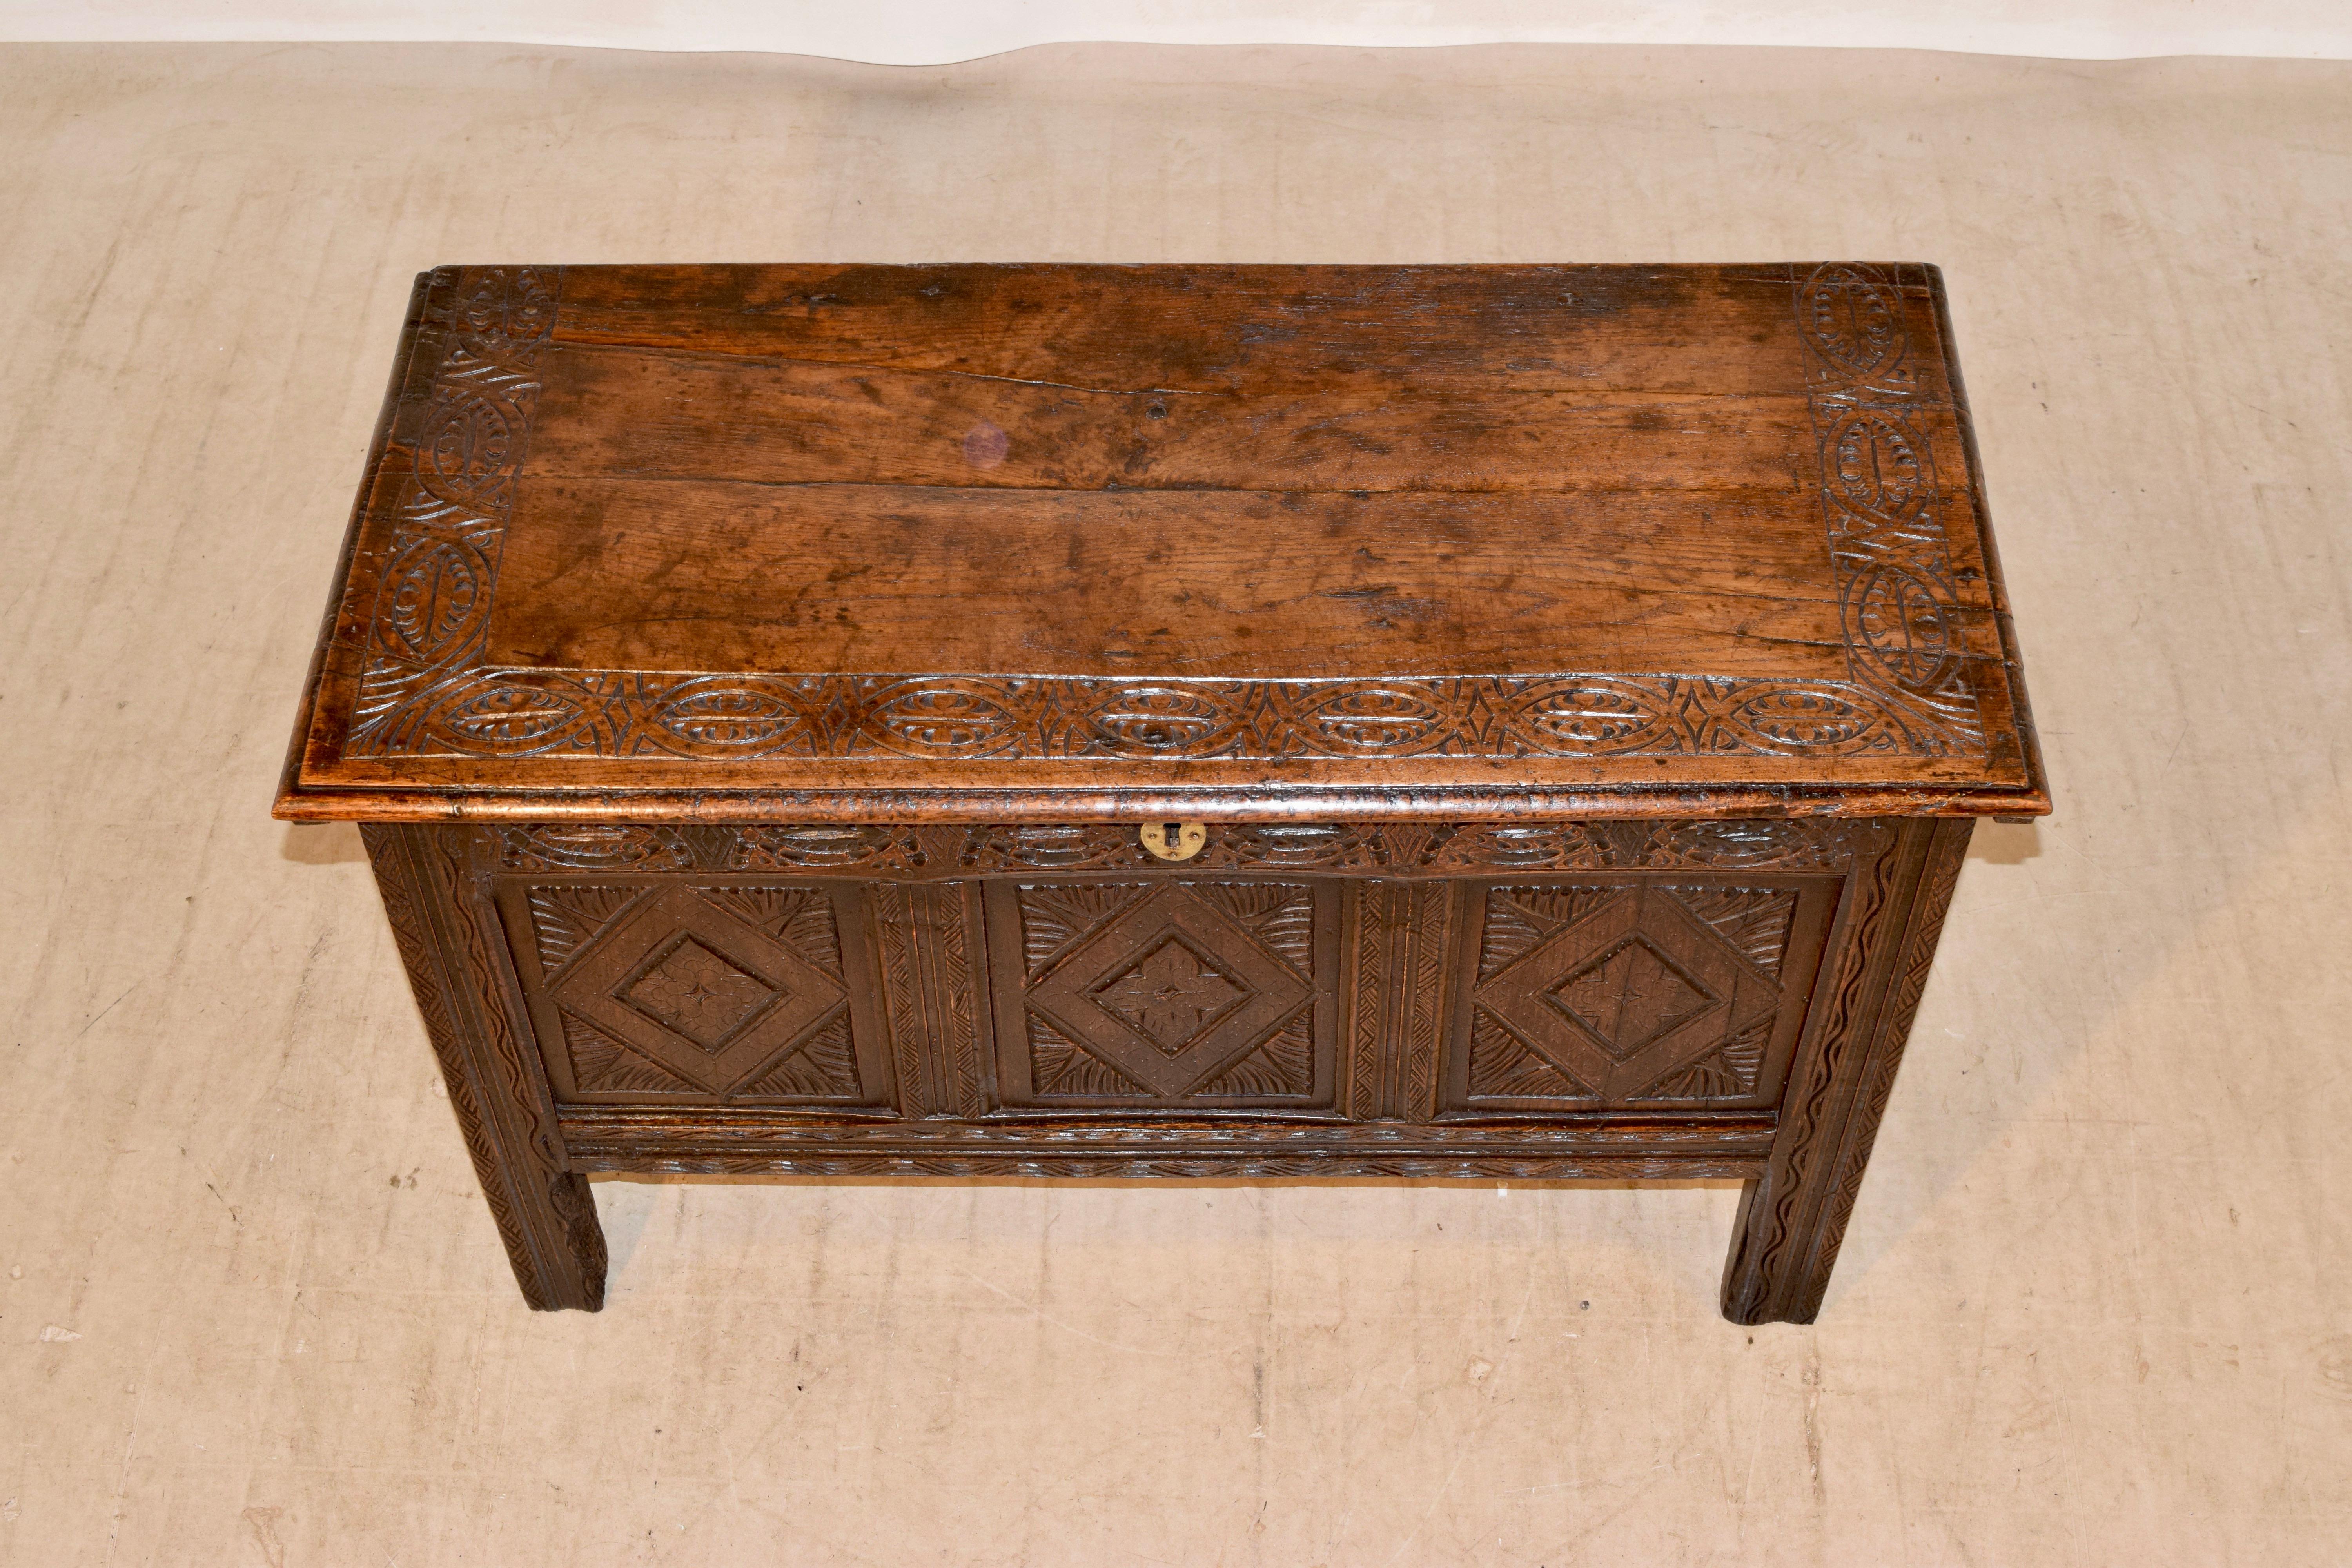 Hand-Carved Late 17th-Early 18th Century Carved Blanket Chest For Sale